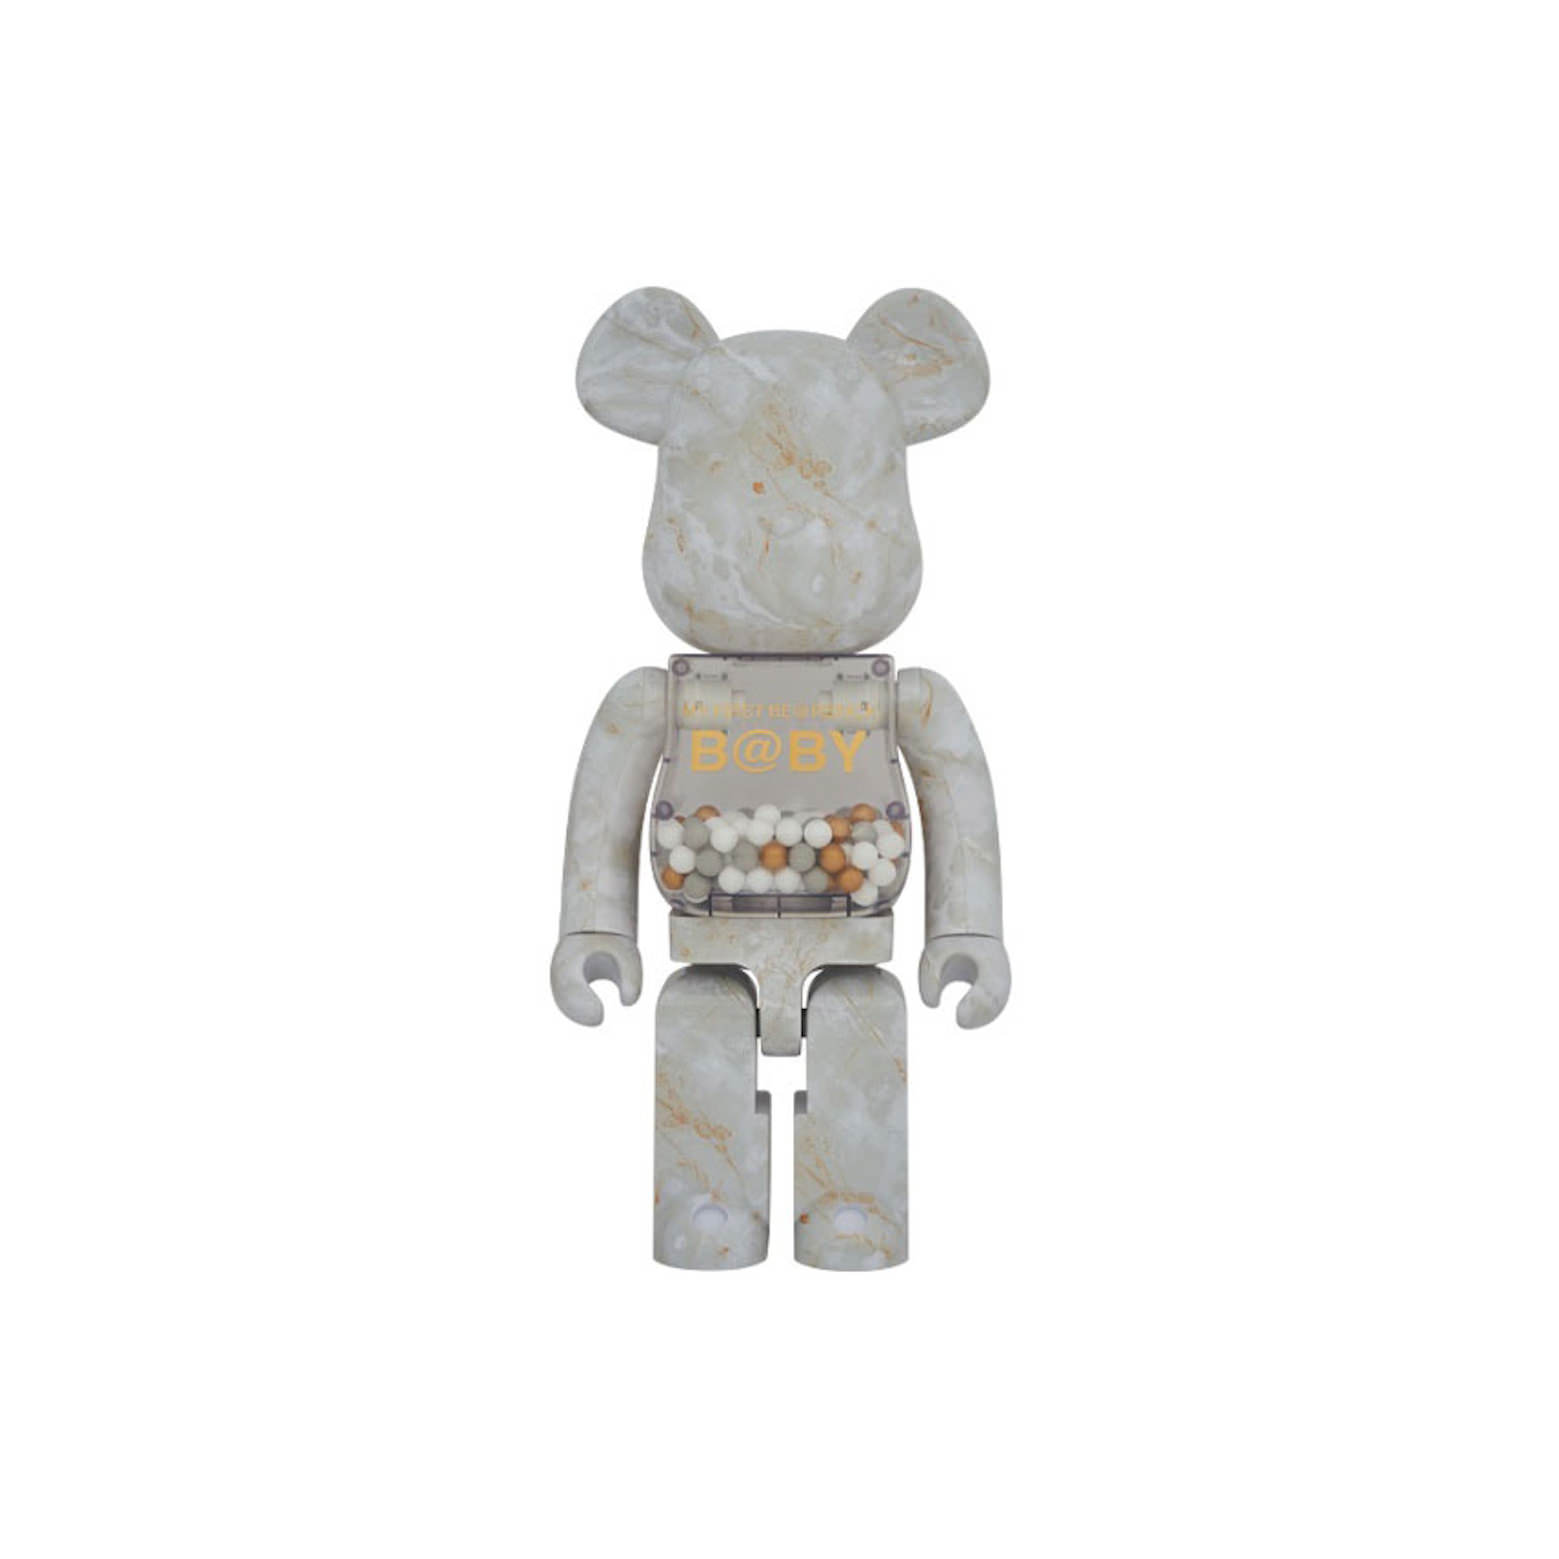 BE@RBRICK B@BY  MARBLE Ver. 100% & 400%